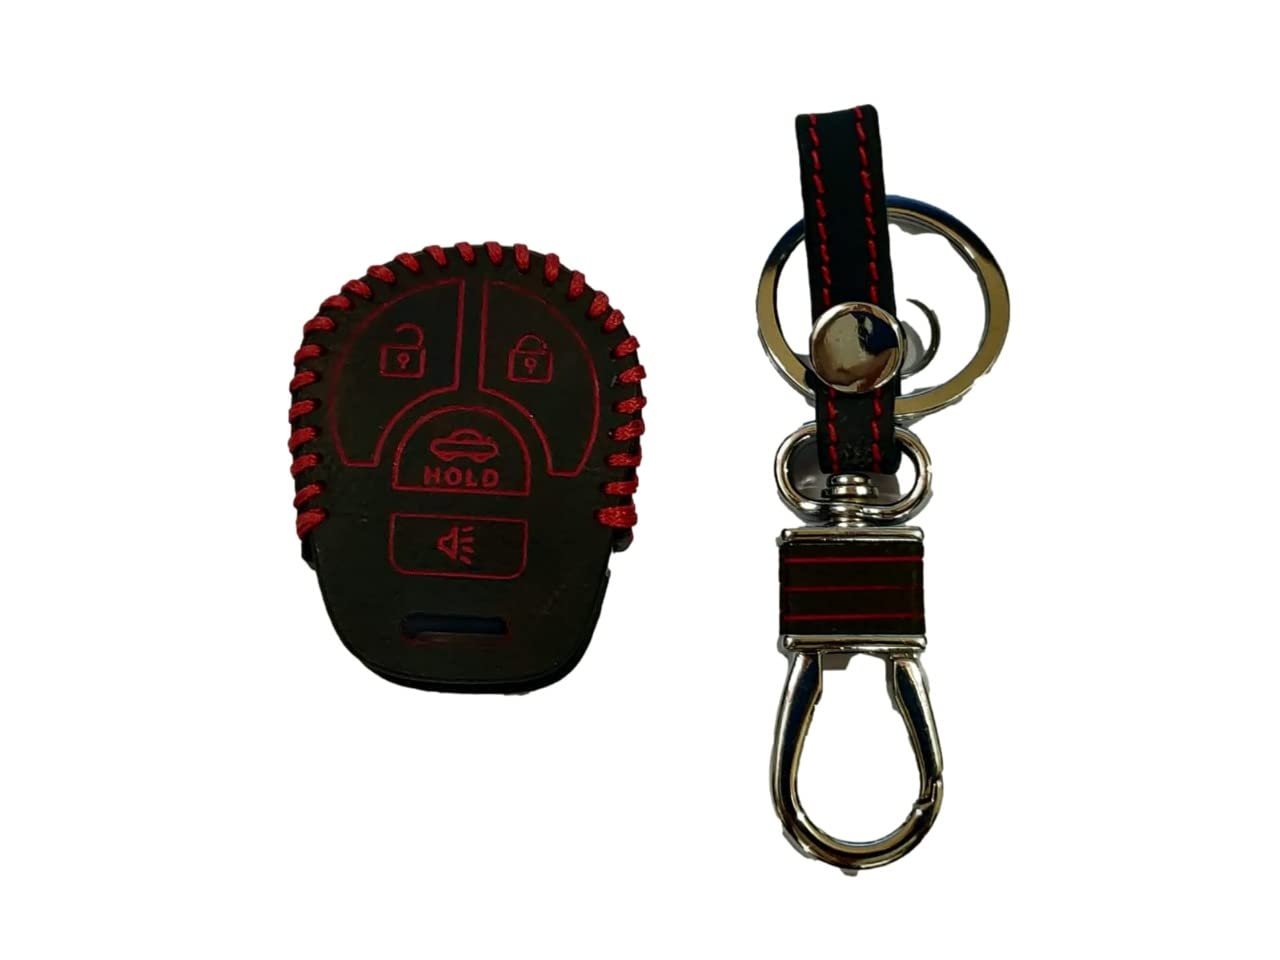 4Button Leather Key Cover For Nissan Sunny/micra (Pack of 1) Image 